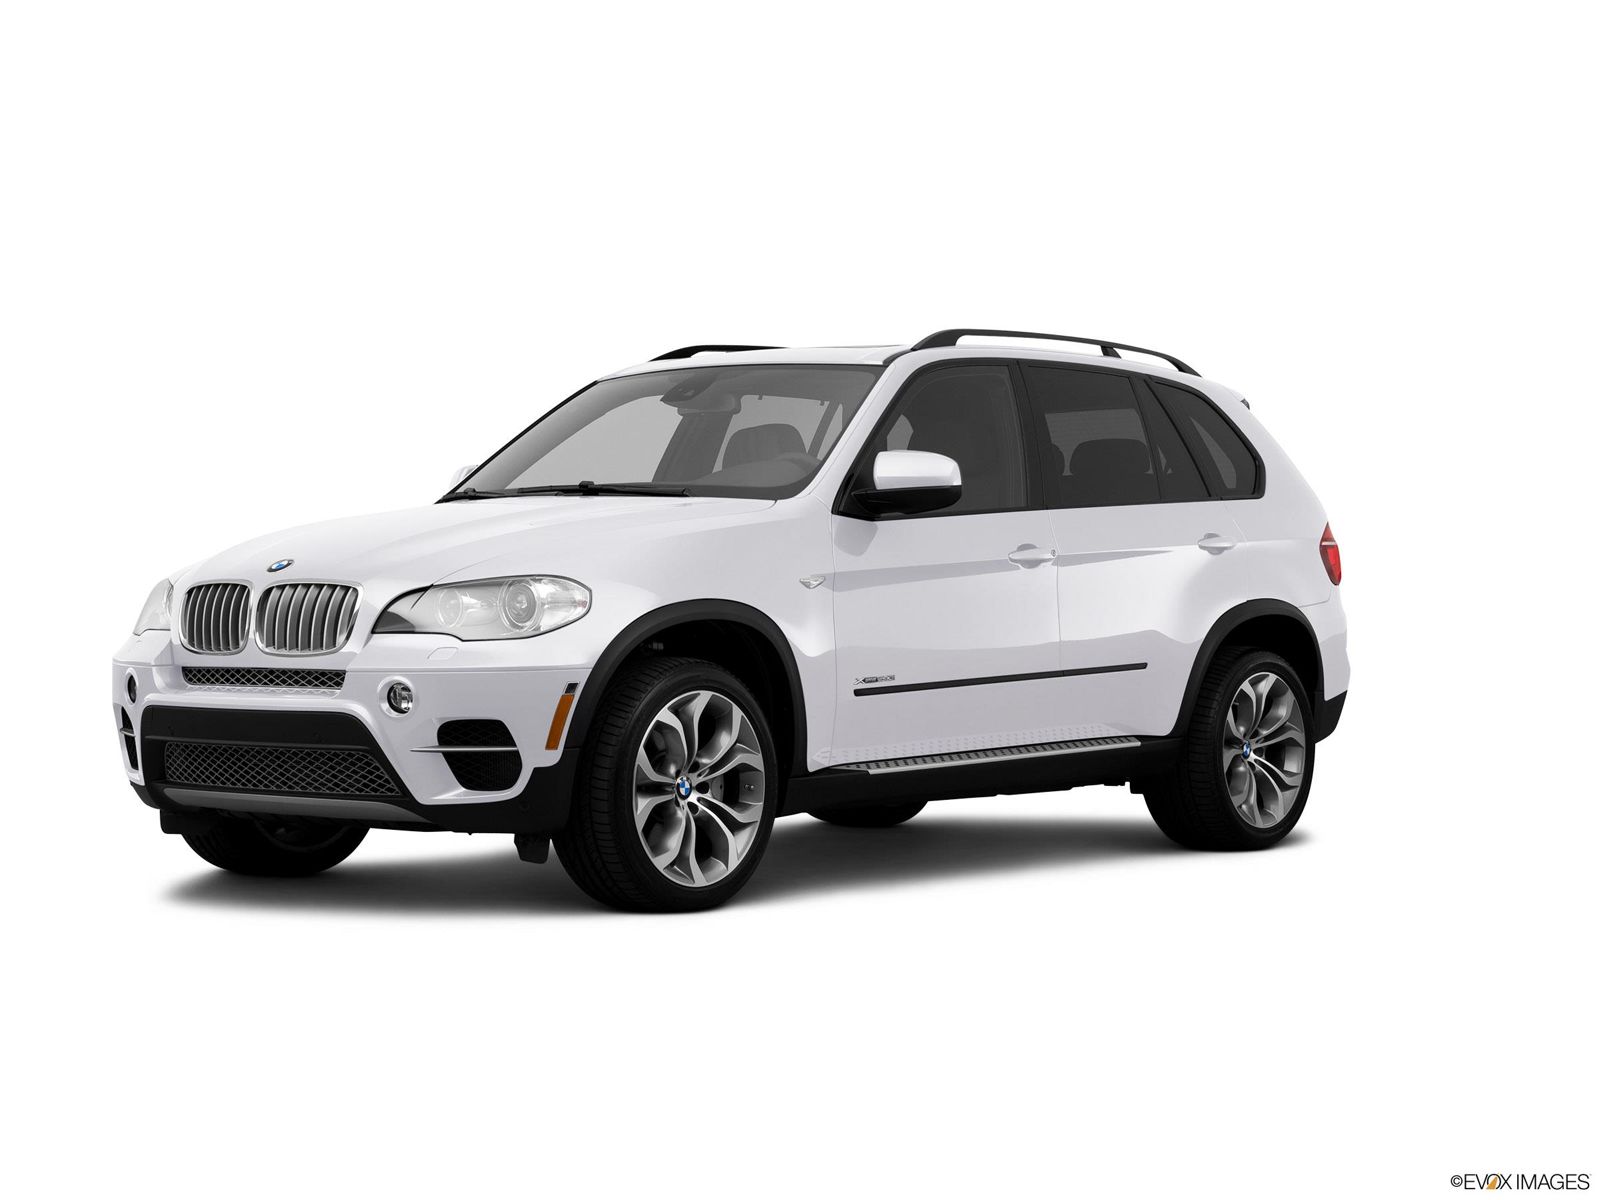 2013 BMW X5 Research, Photos, Specs and Expertise | CarMax